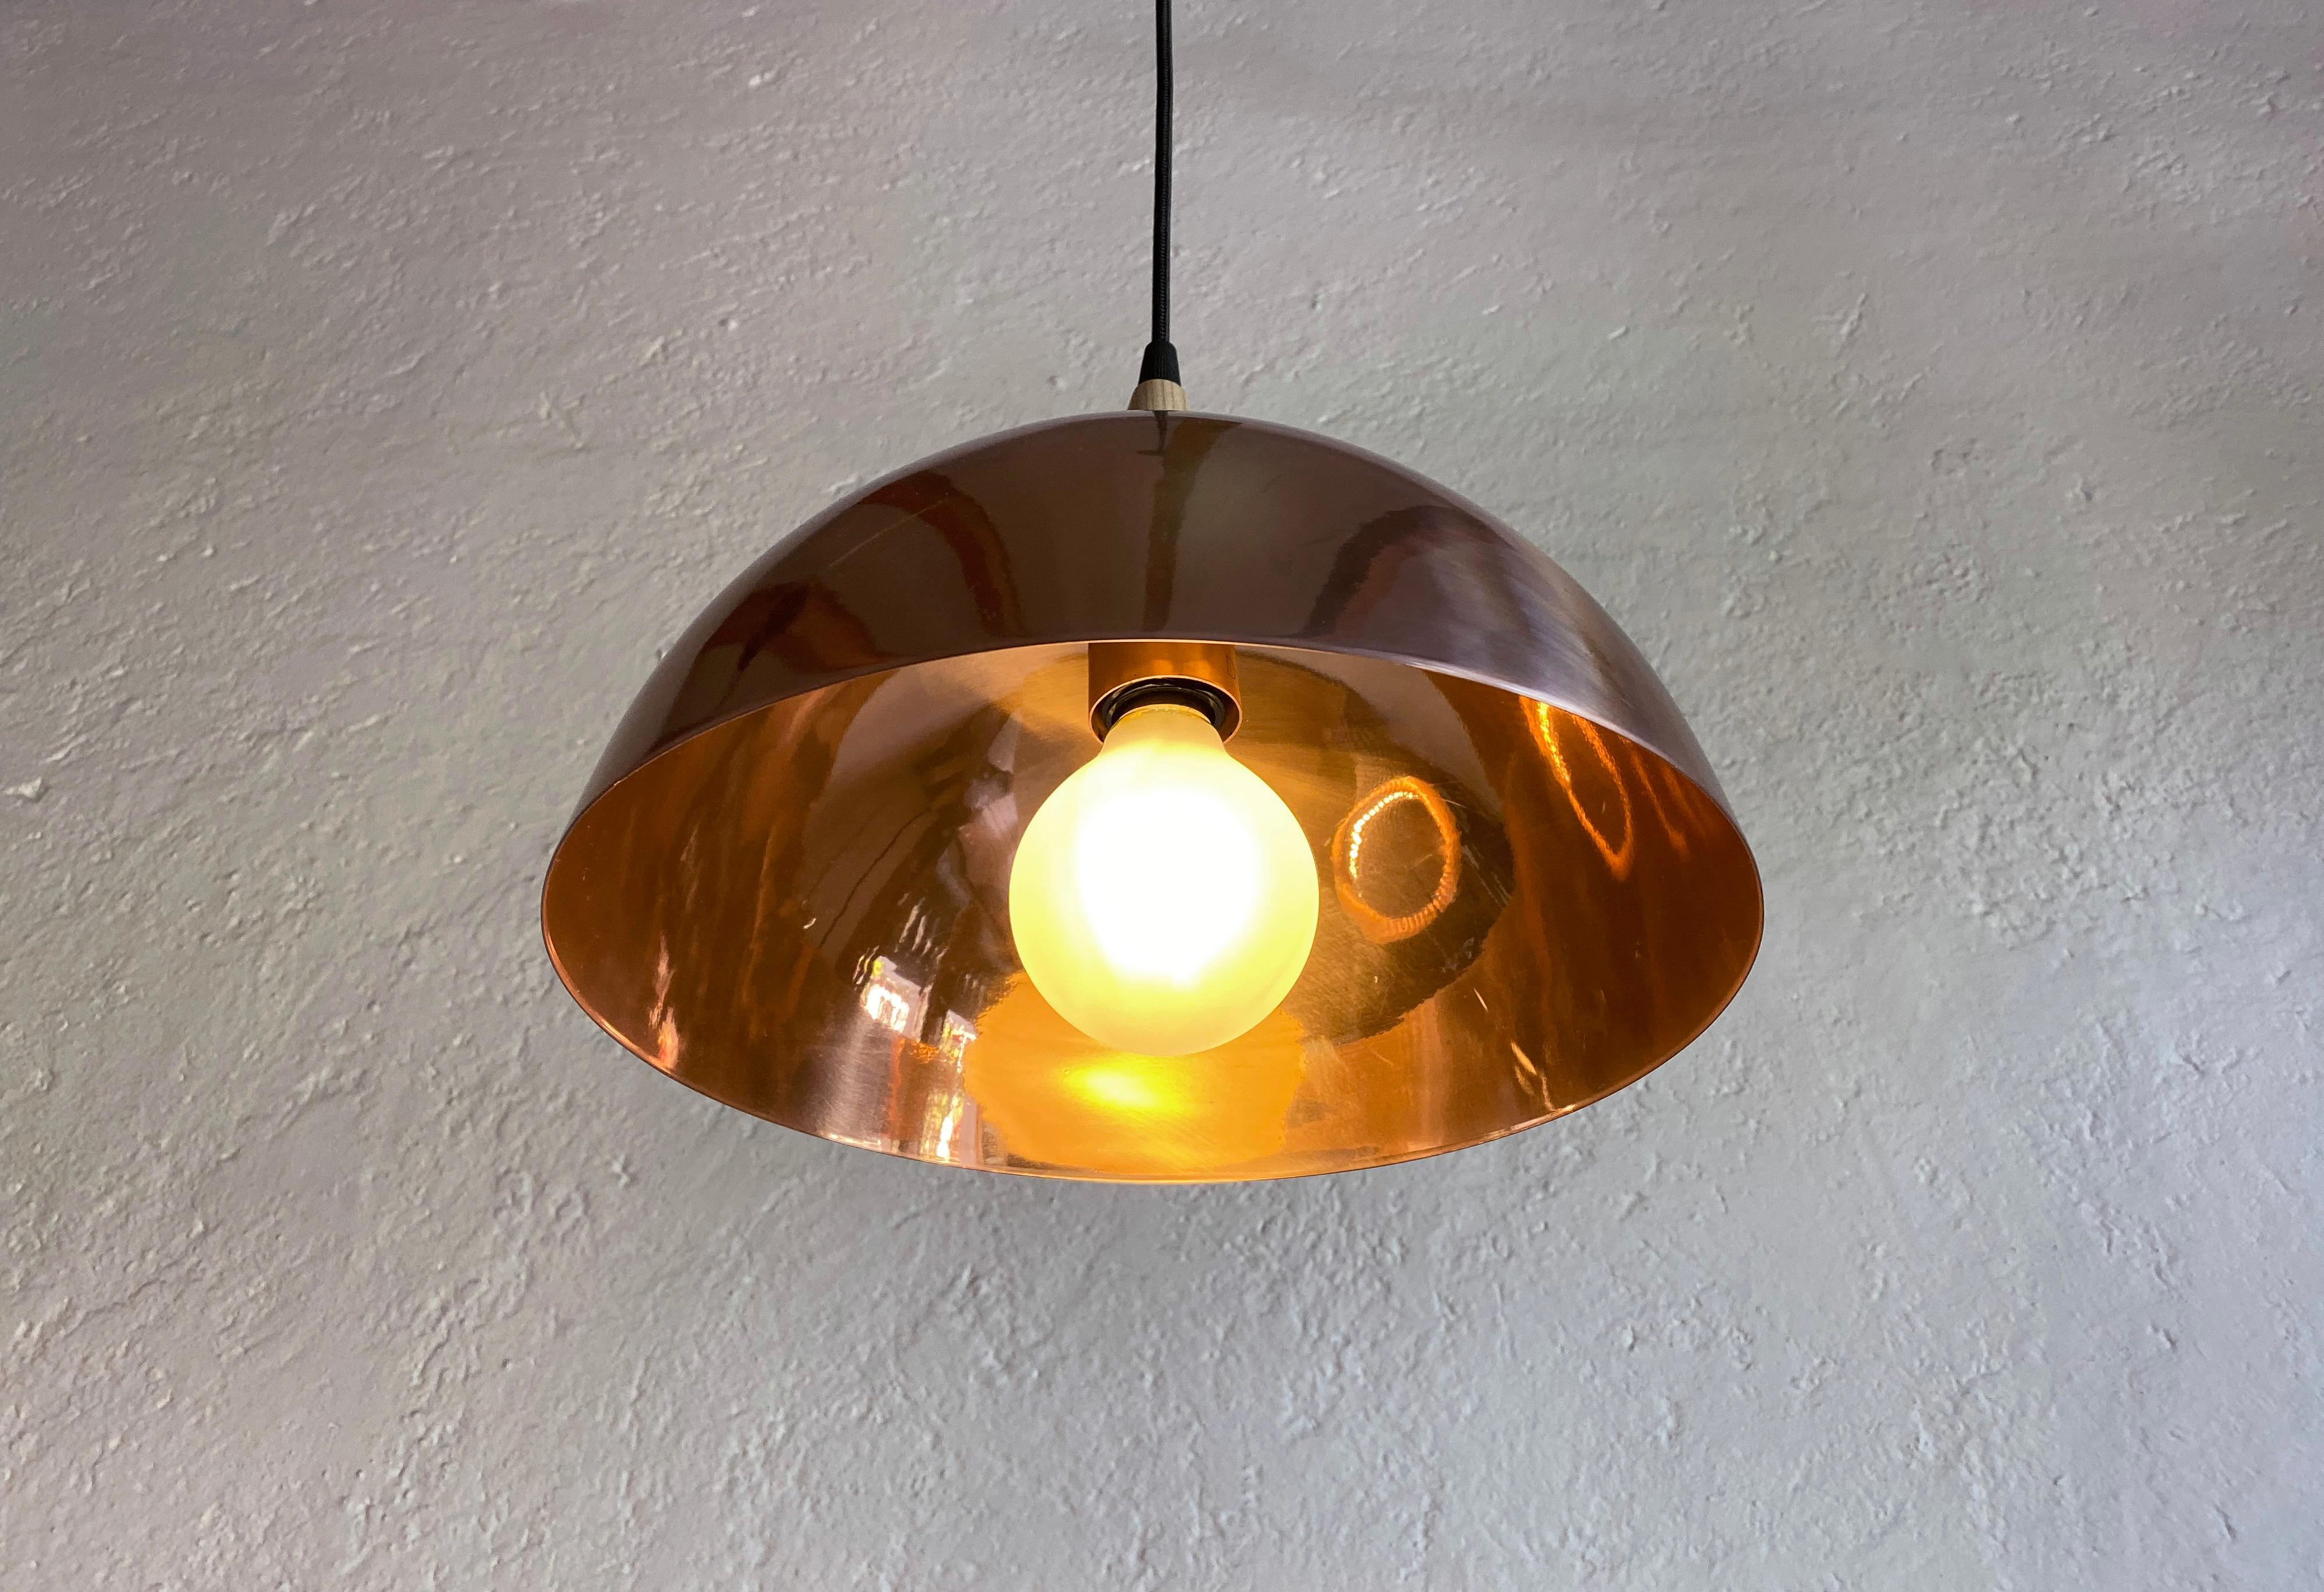 This Domo Abajo ceiling lamp is made of solid steel, copper, and ash wood with a polished finish, in size ø40. Full dimensions: ø40 x 28 cm. Foco ideal ø10cm Dome: H 20 x W 40.

Domo Abajo pendant lamp is available in multiple dimensions and